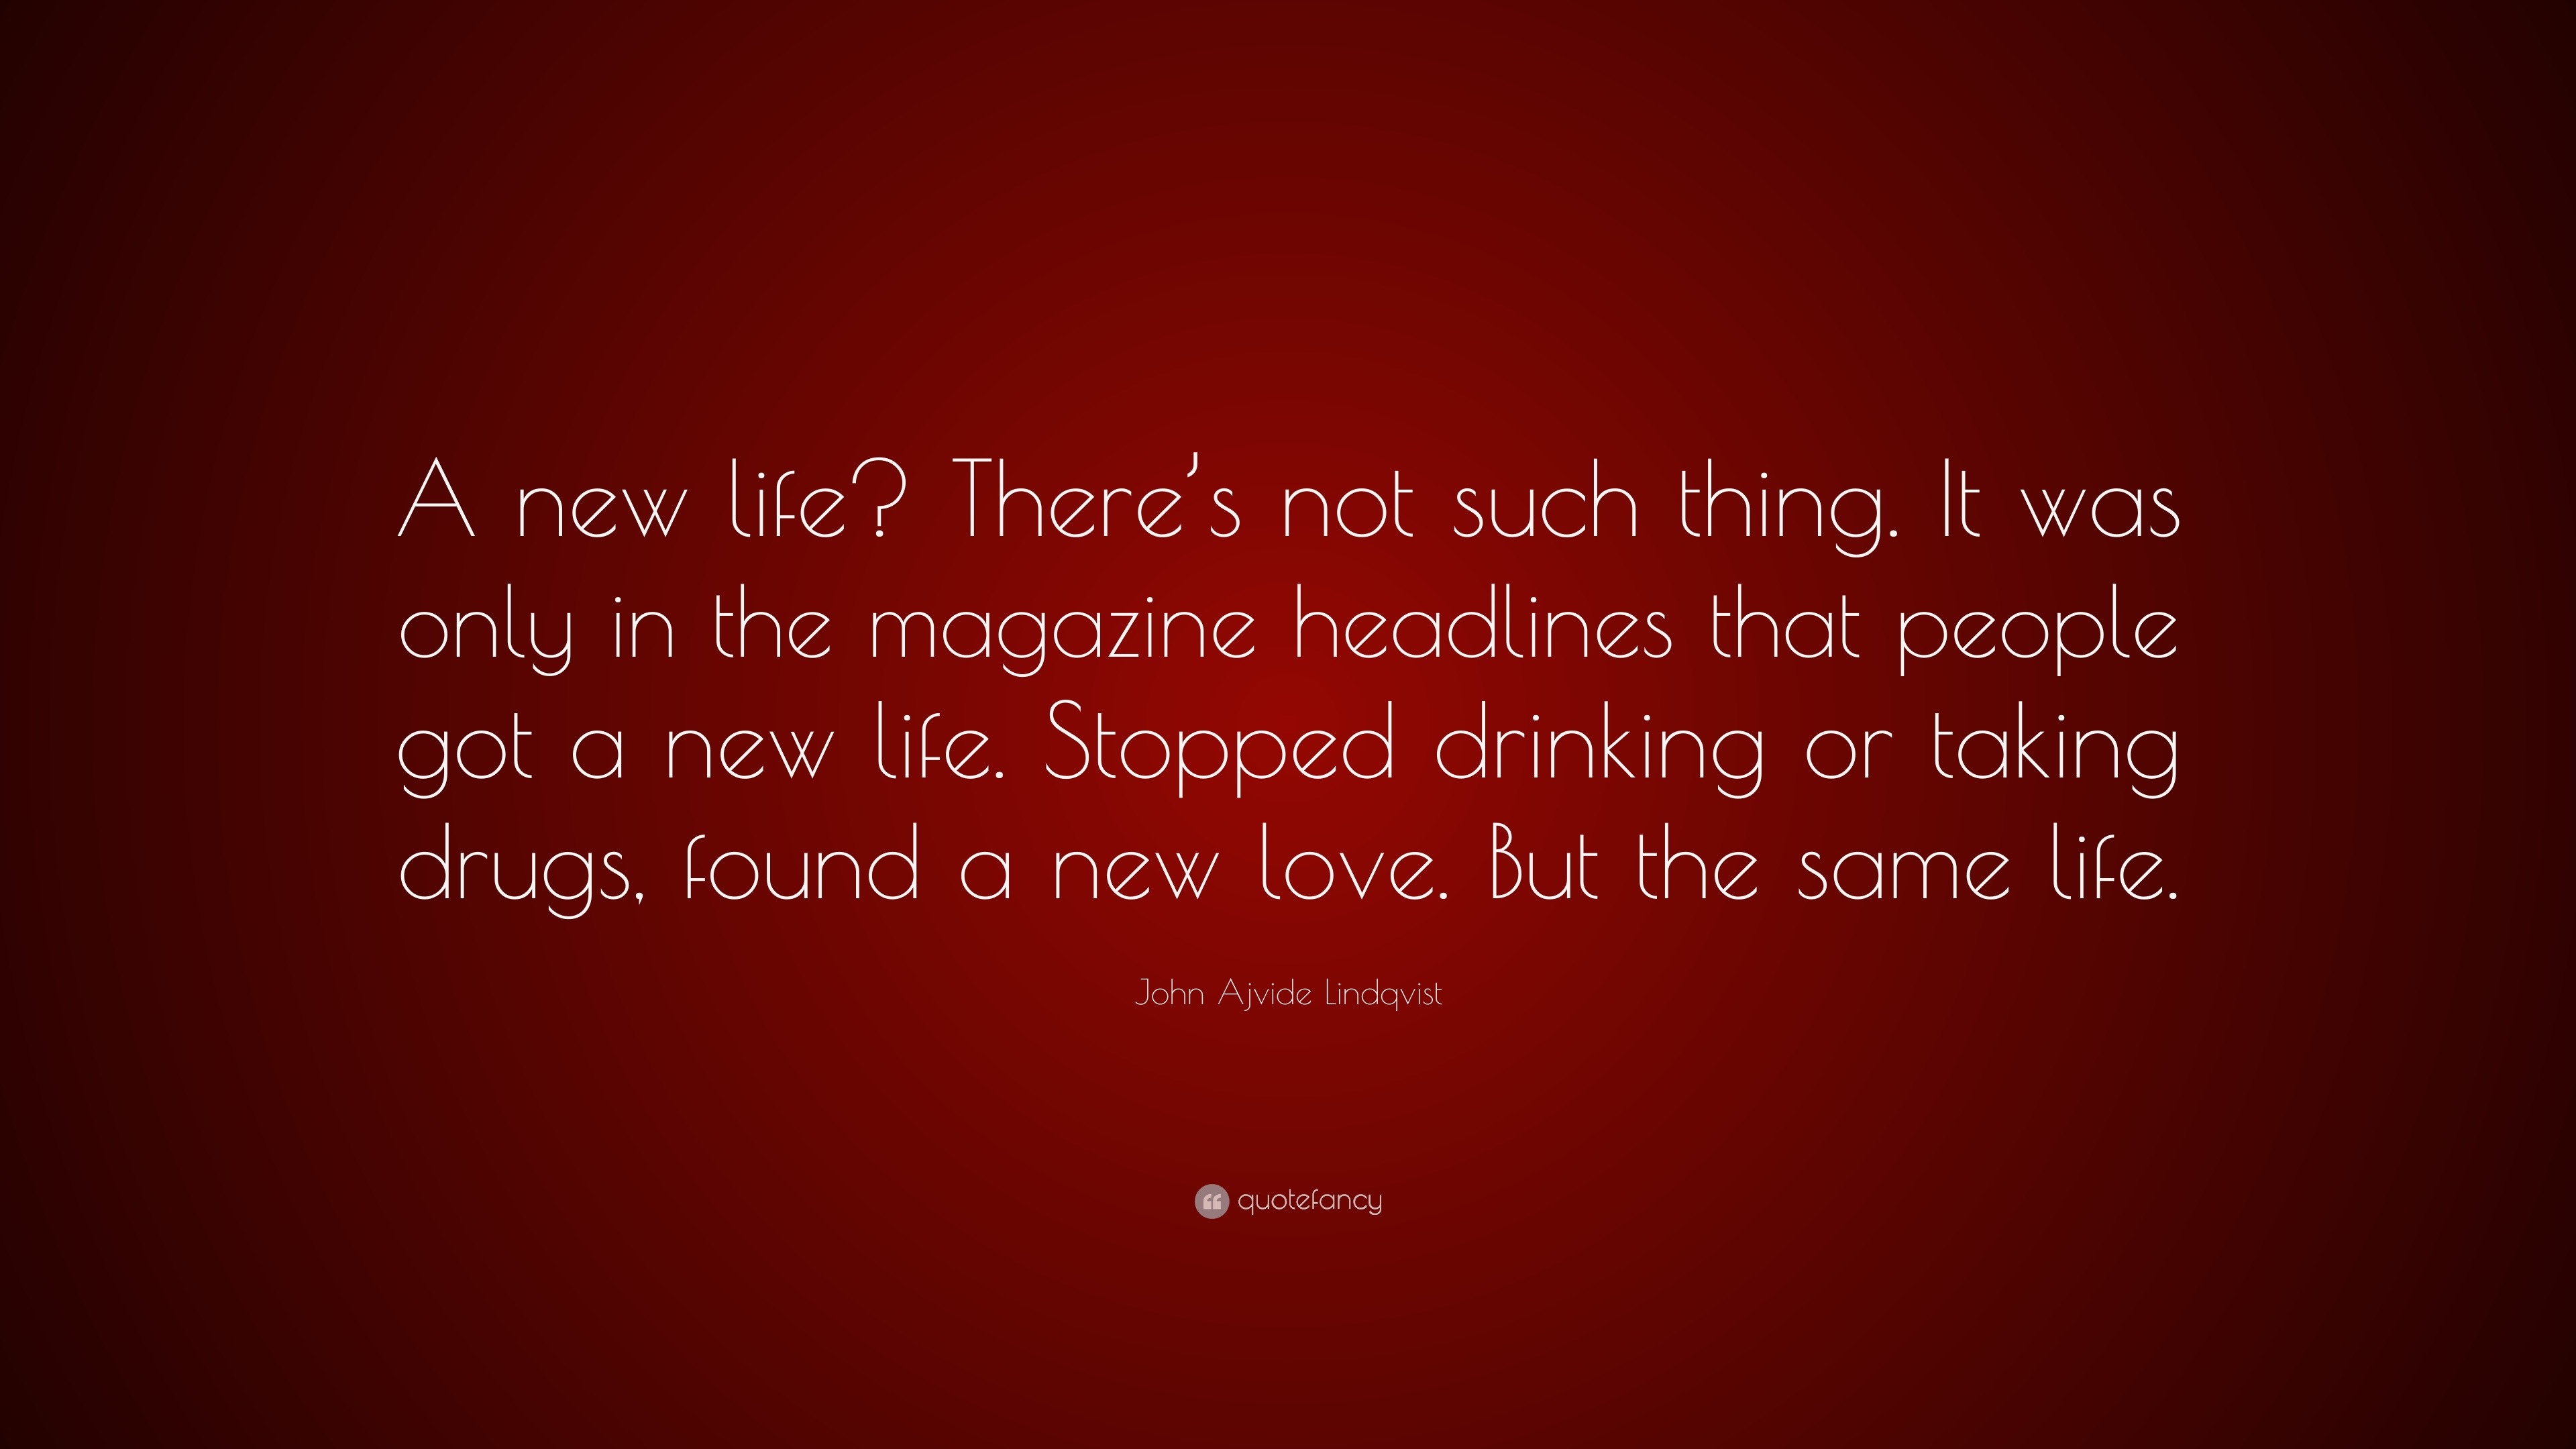 John Ajvide Lindqvist Quote “A new life There s not such thing It